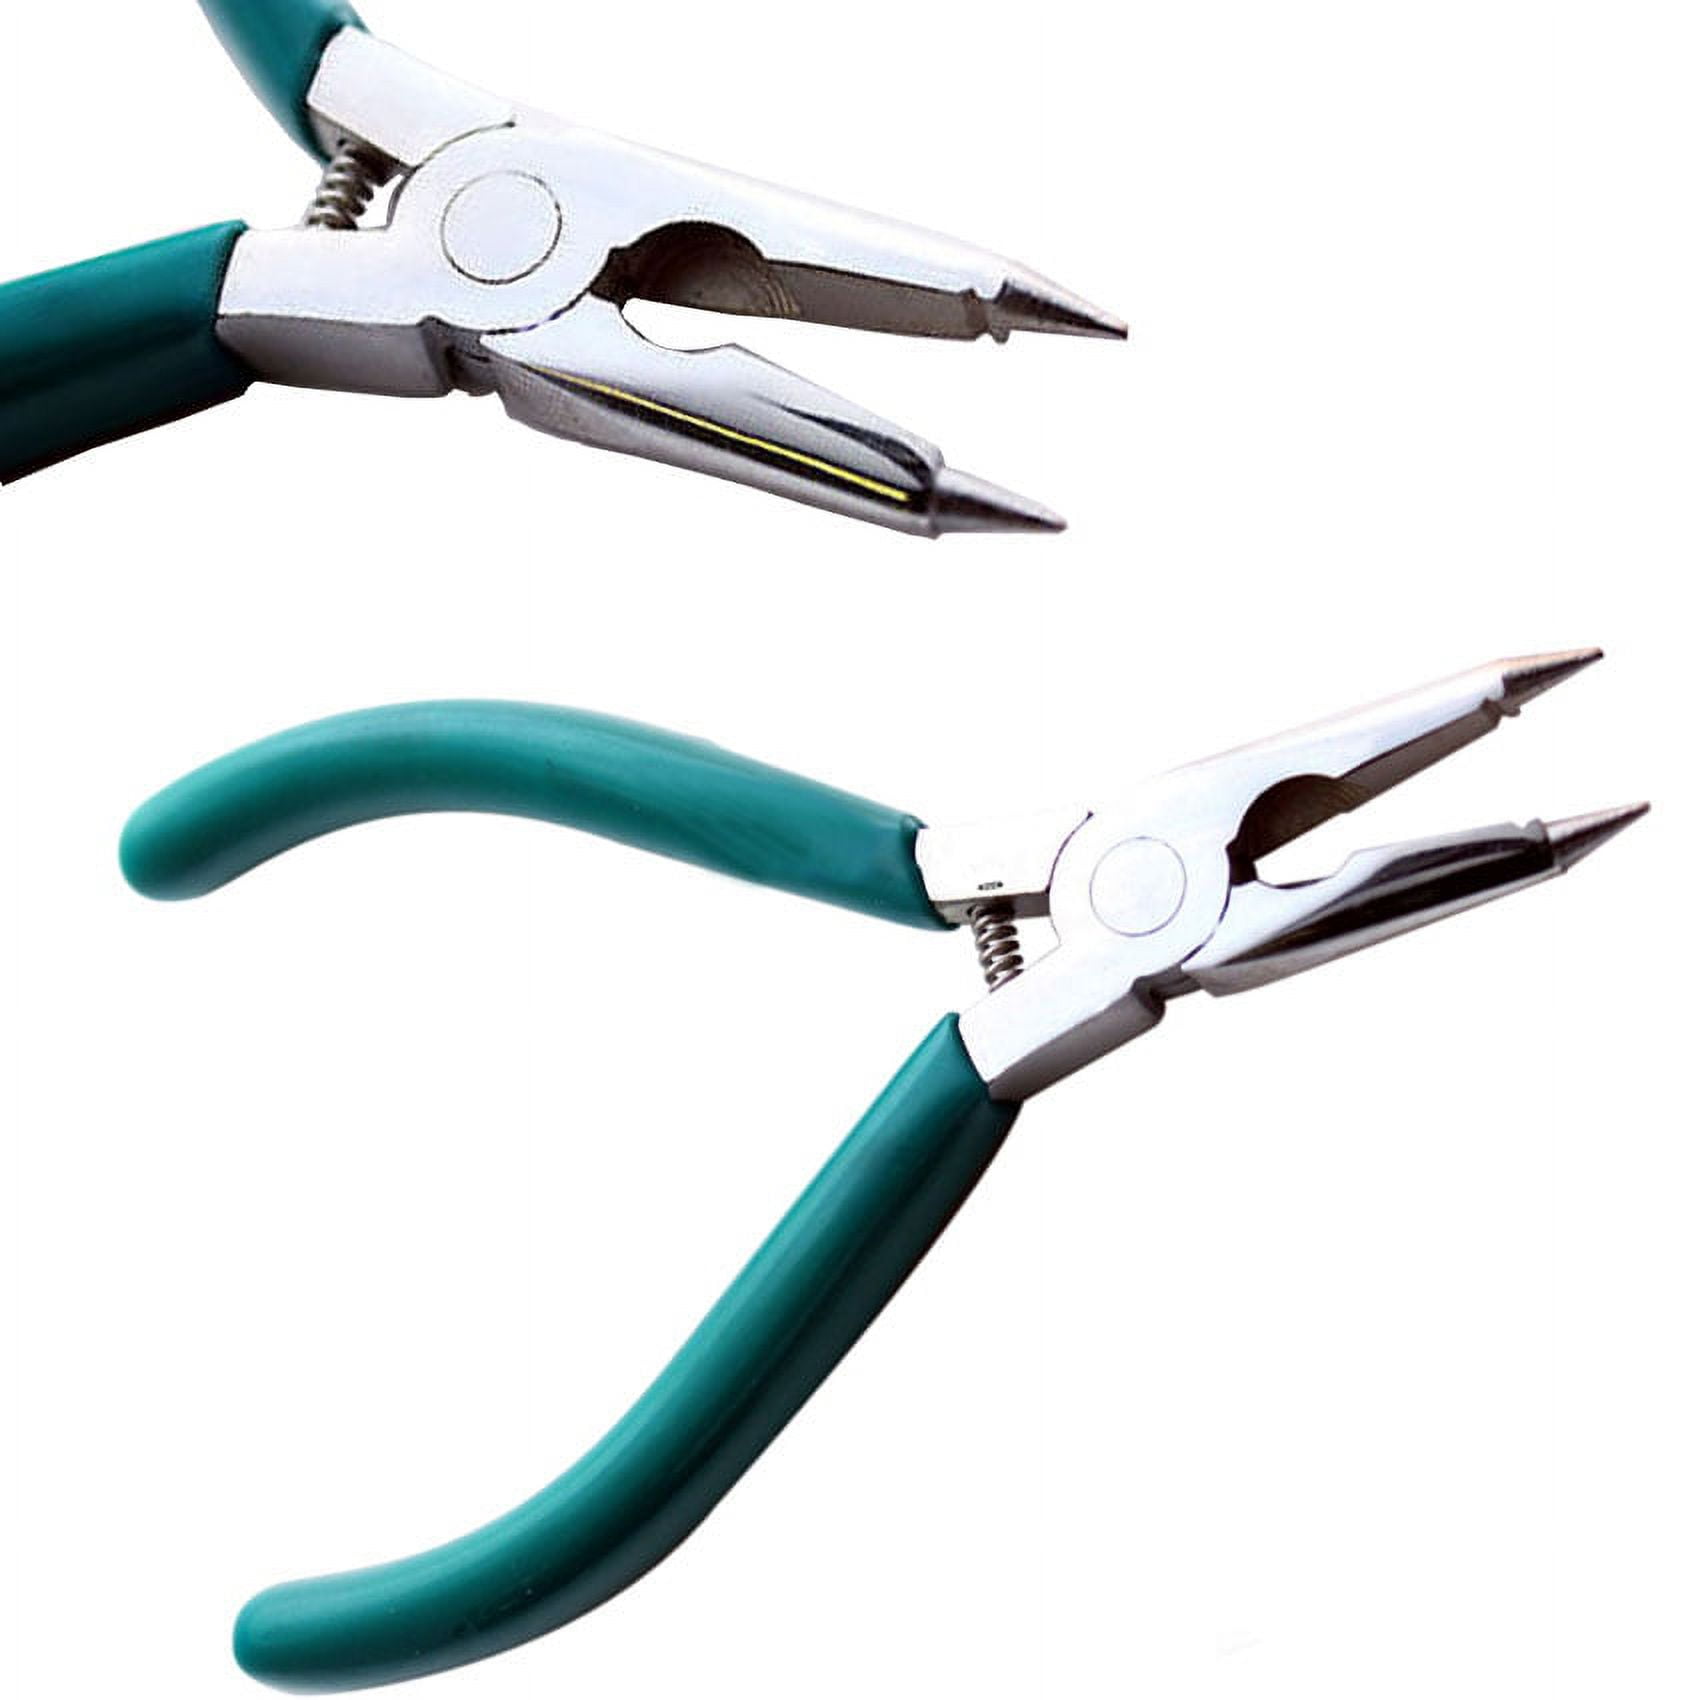 The Beadsmith 1-Step Combo Pack - 1.5mm, 2.25mm & 3mm Looper Pliers -  24-18g Craft Wire - Instantly Create Consistent Loops for Rosaries, Earrings,  Bracelets, Necklaces & Wire Jewelry in One Step 